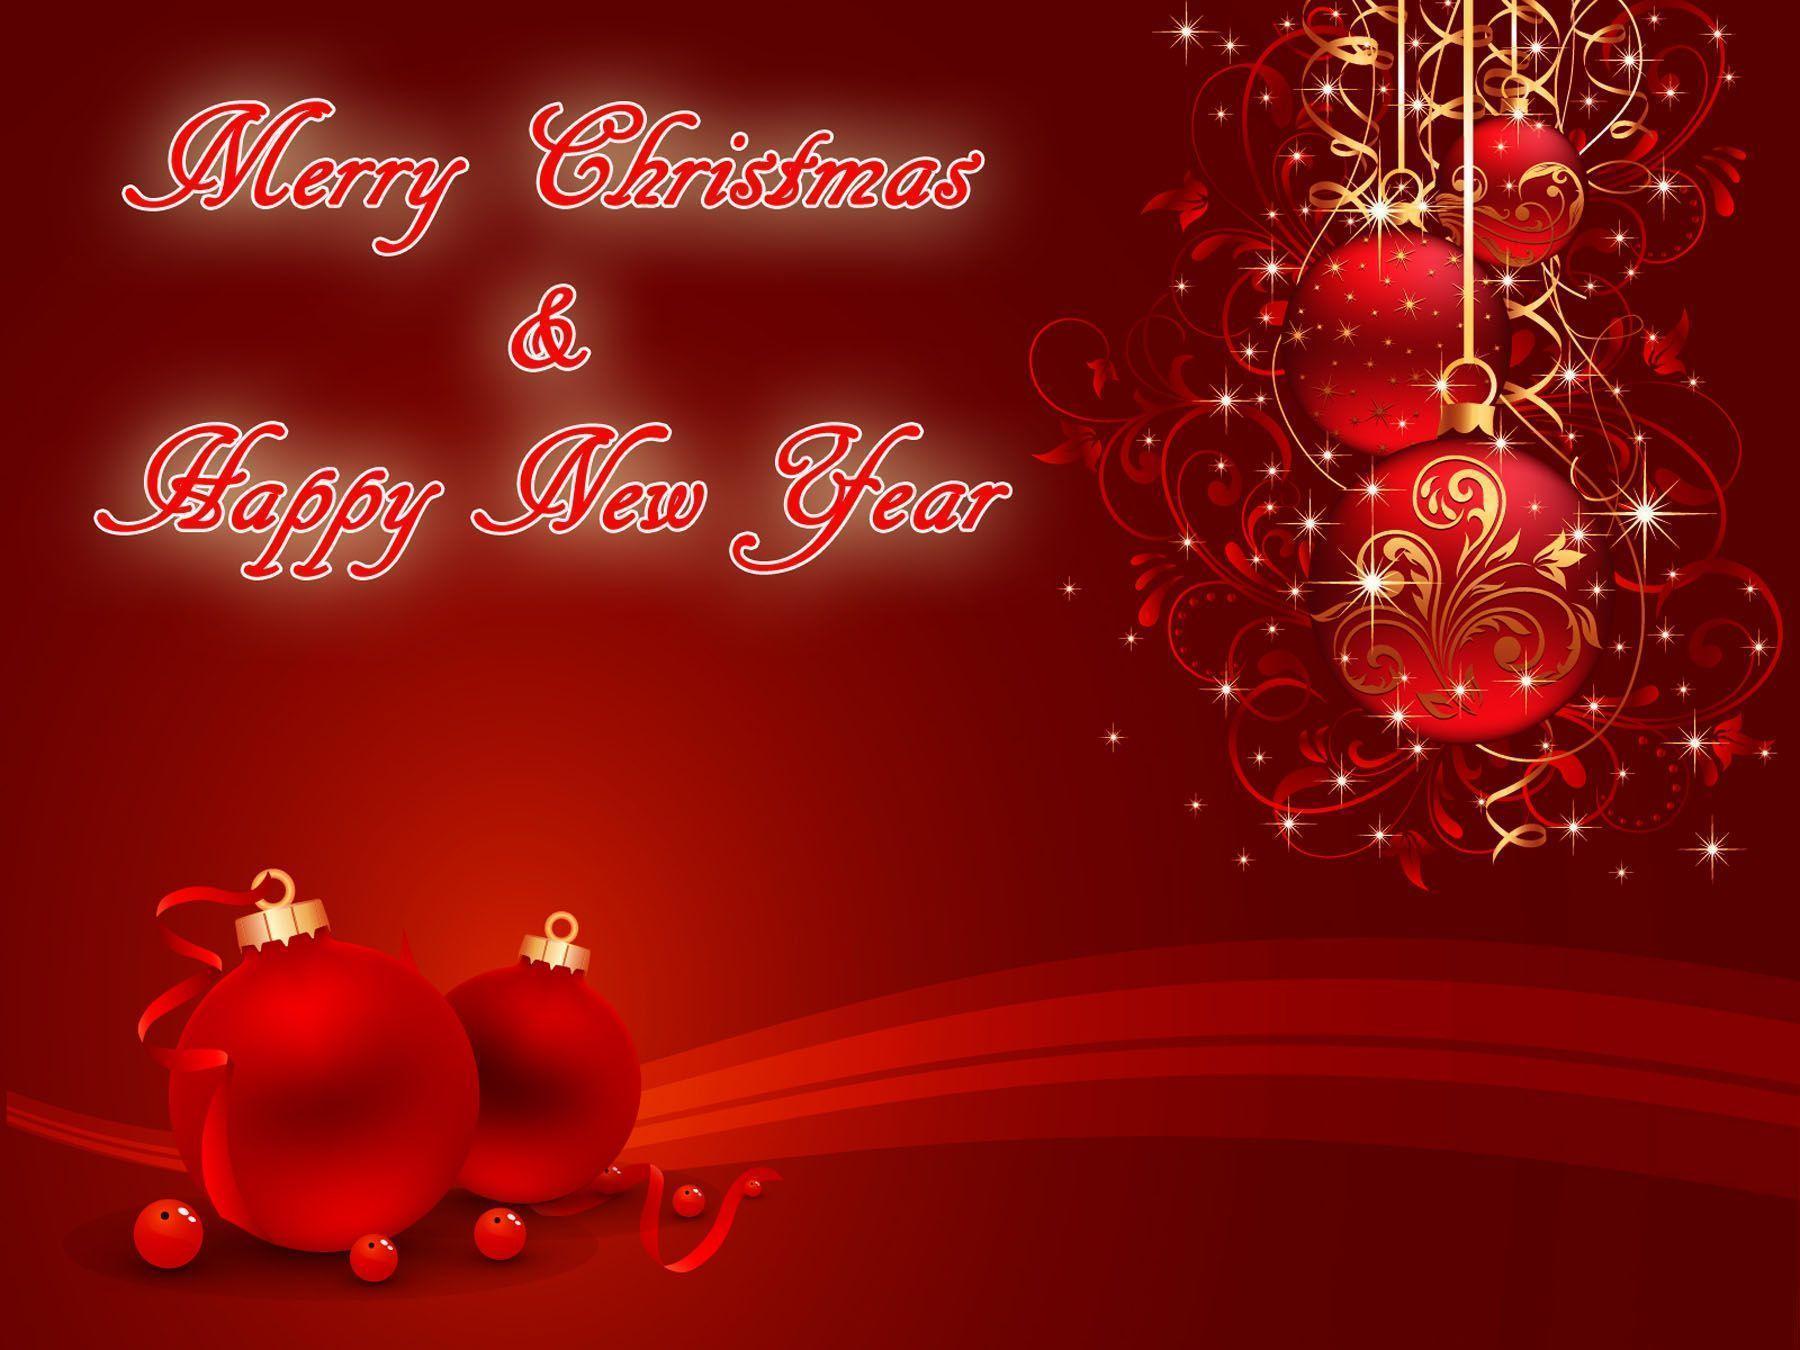 new year 2014 Christmas 2013 wallpaper greeting cards